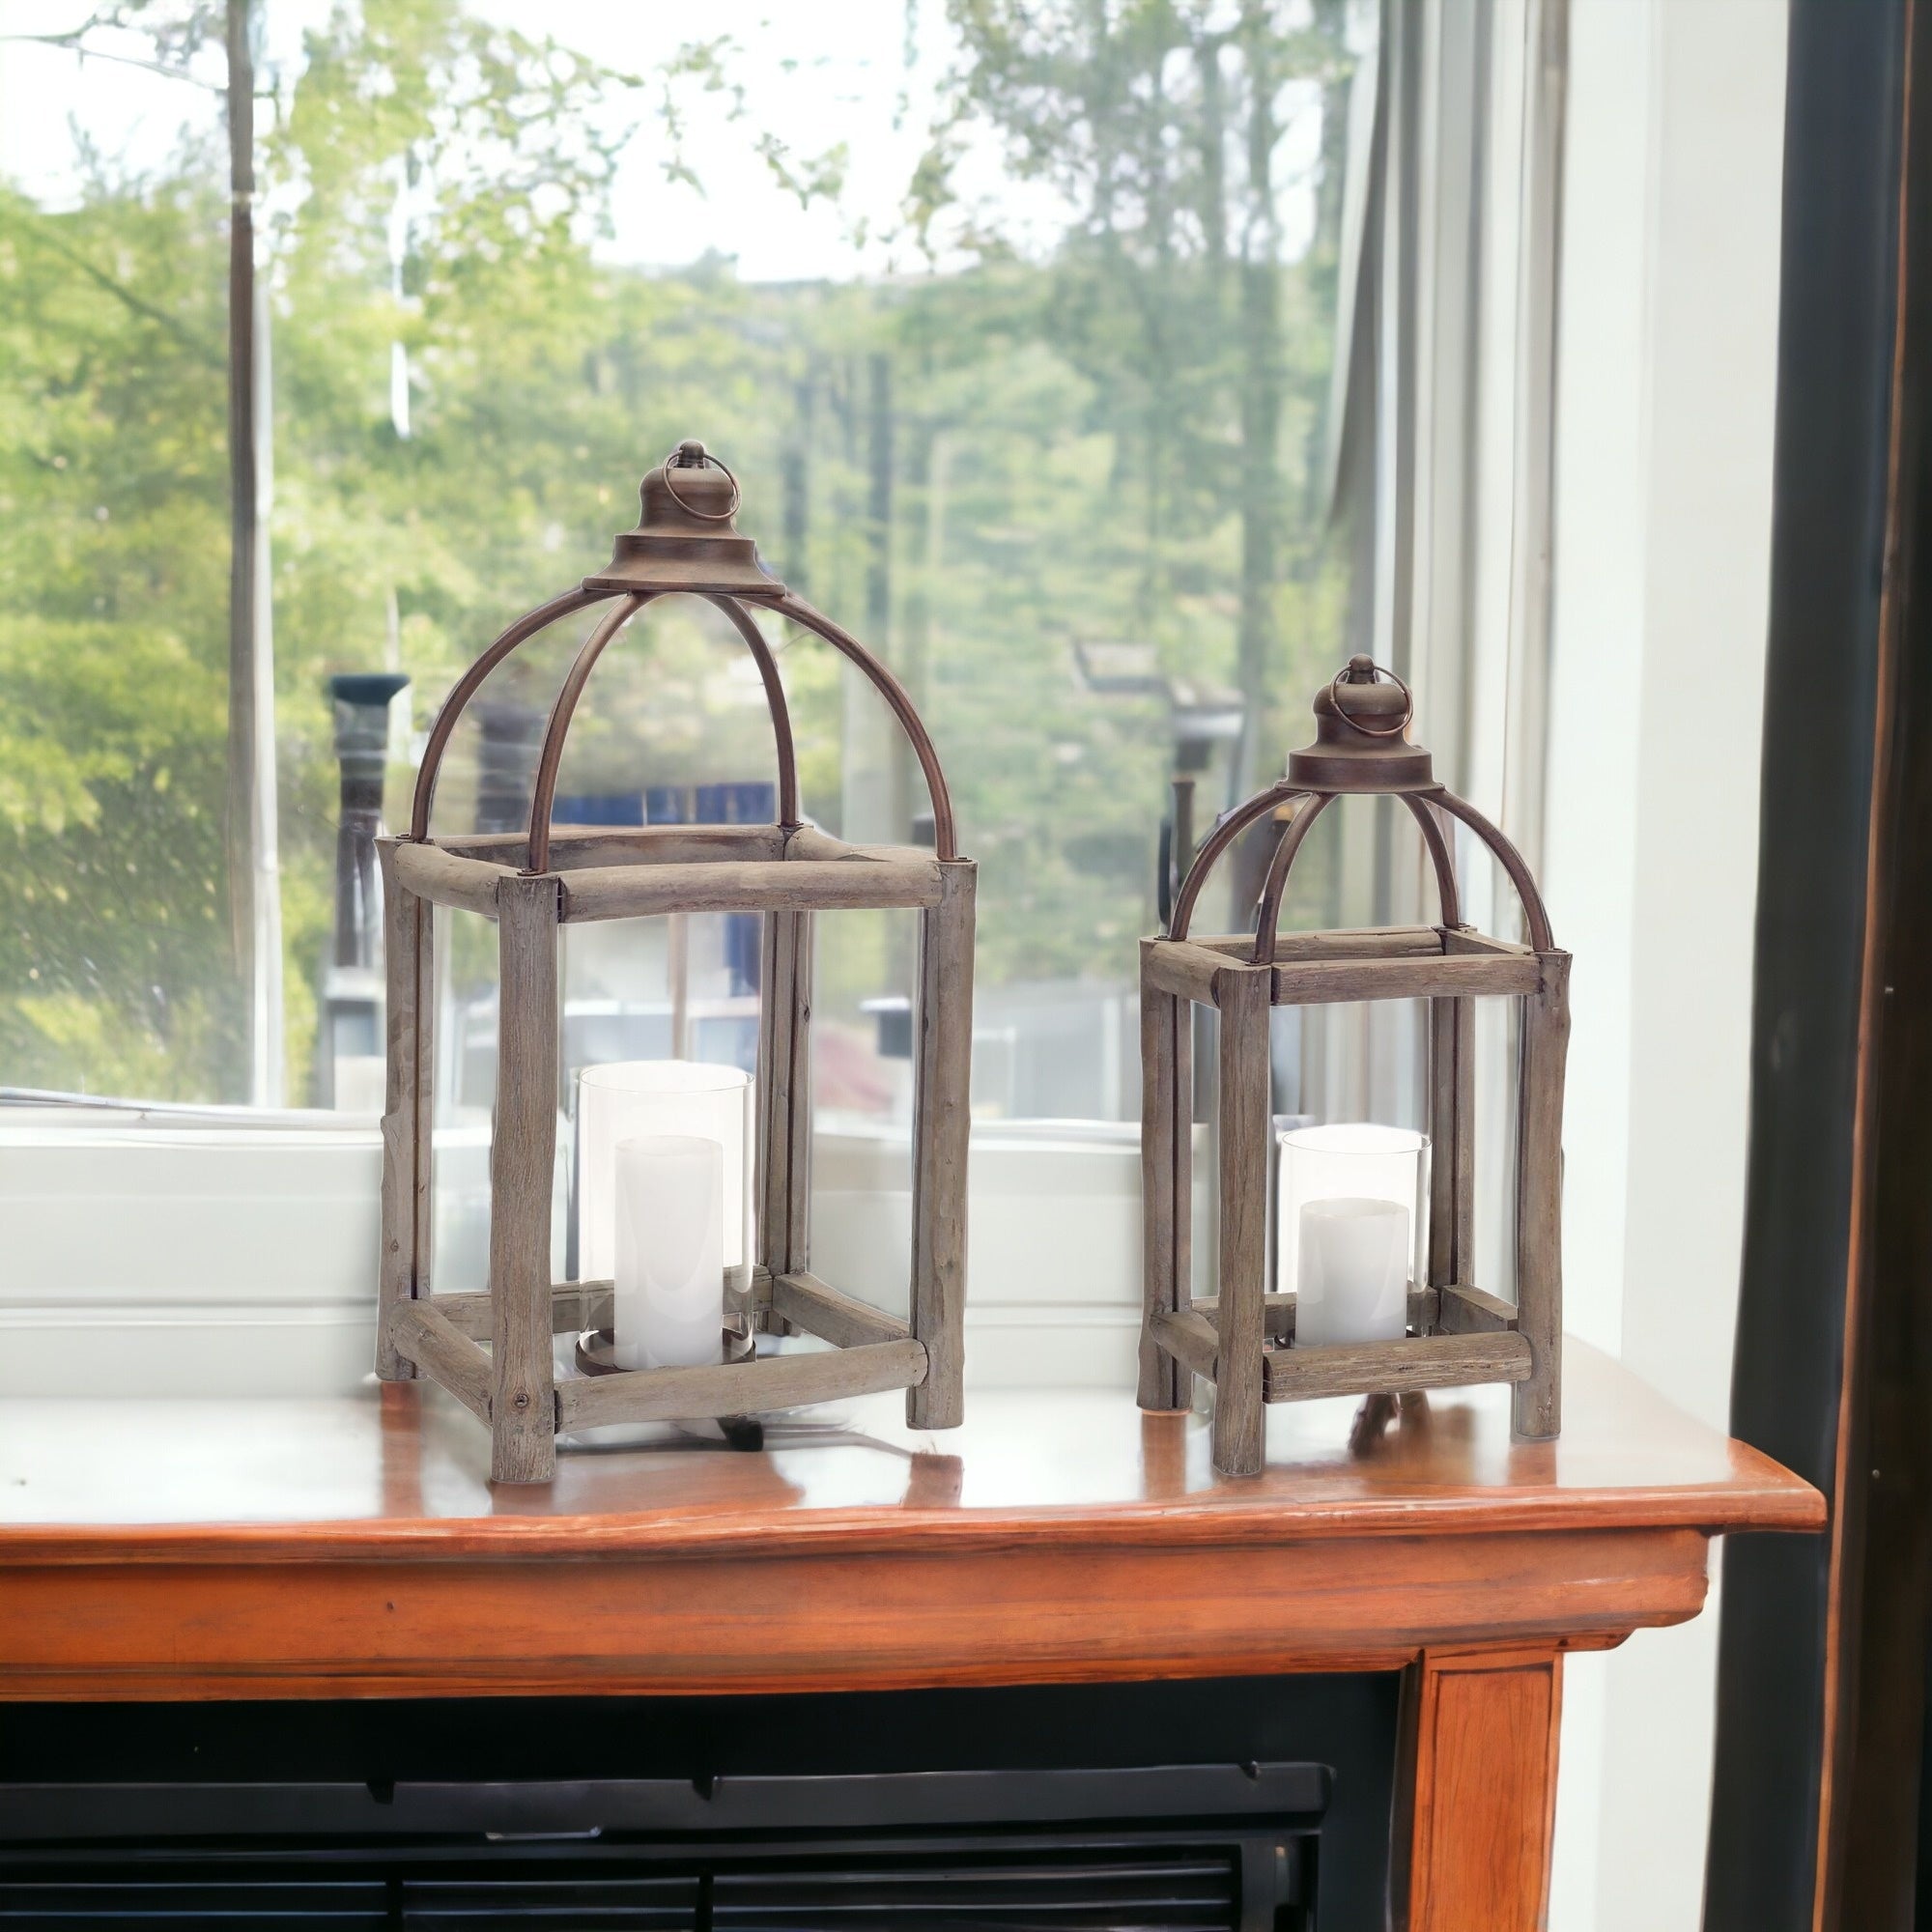 Set Of Two Gray Flameless Floor Lantern Candle Holder - Tuesday Morning-Candle Holders